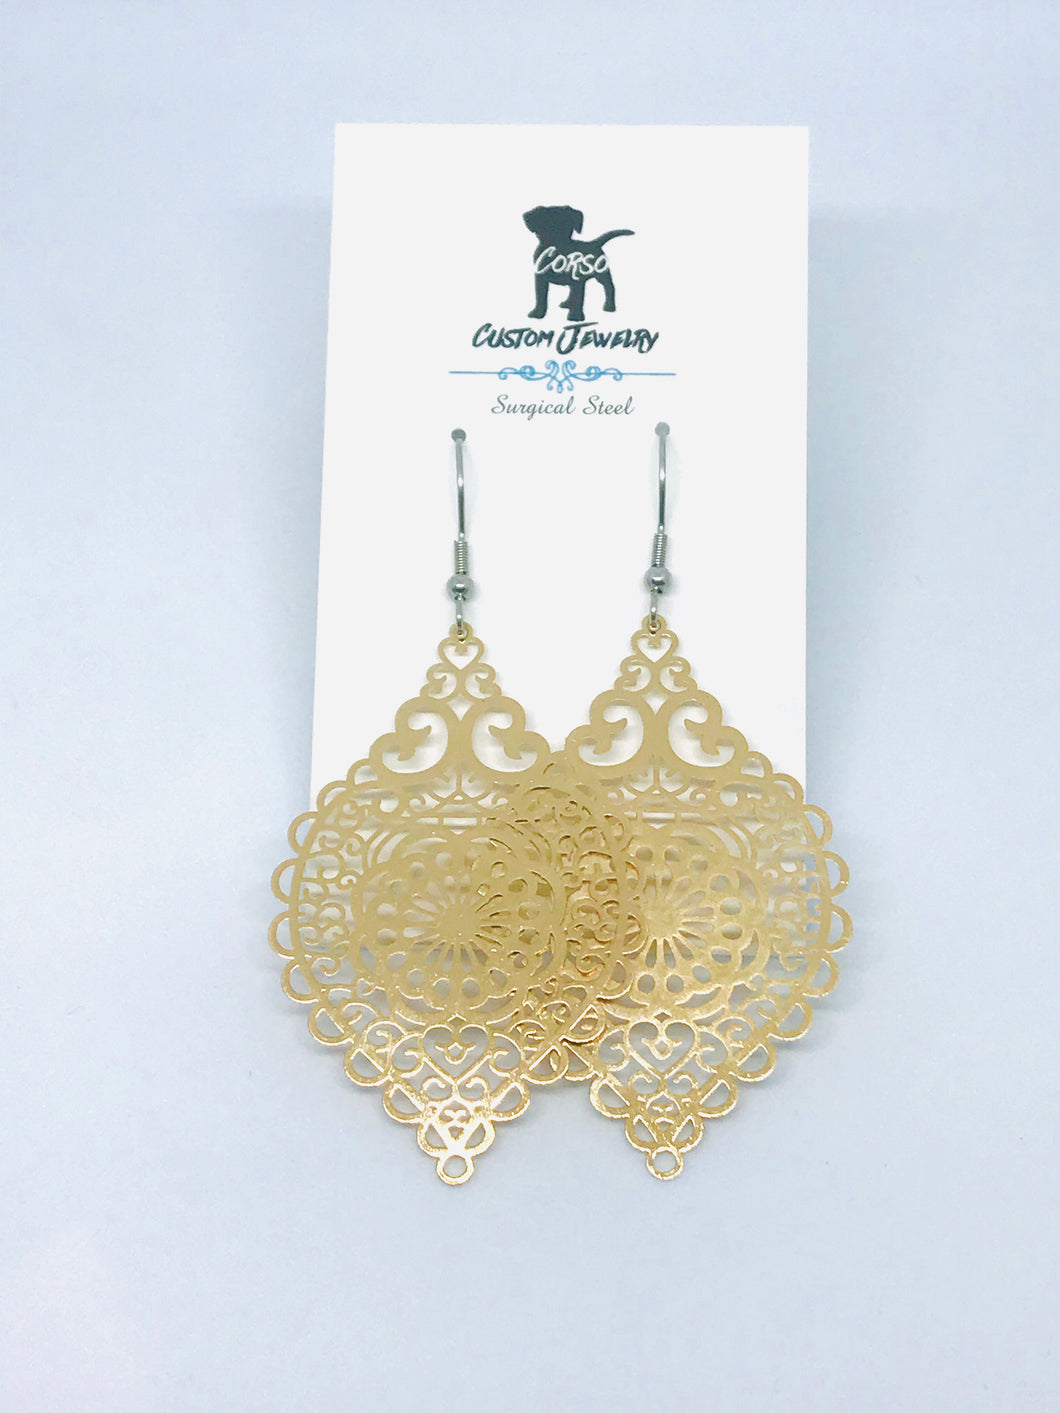 Champagne Spindle Drop Earrings (Surgical Steel)